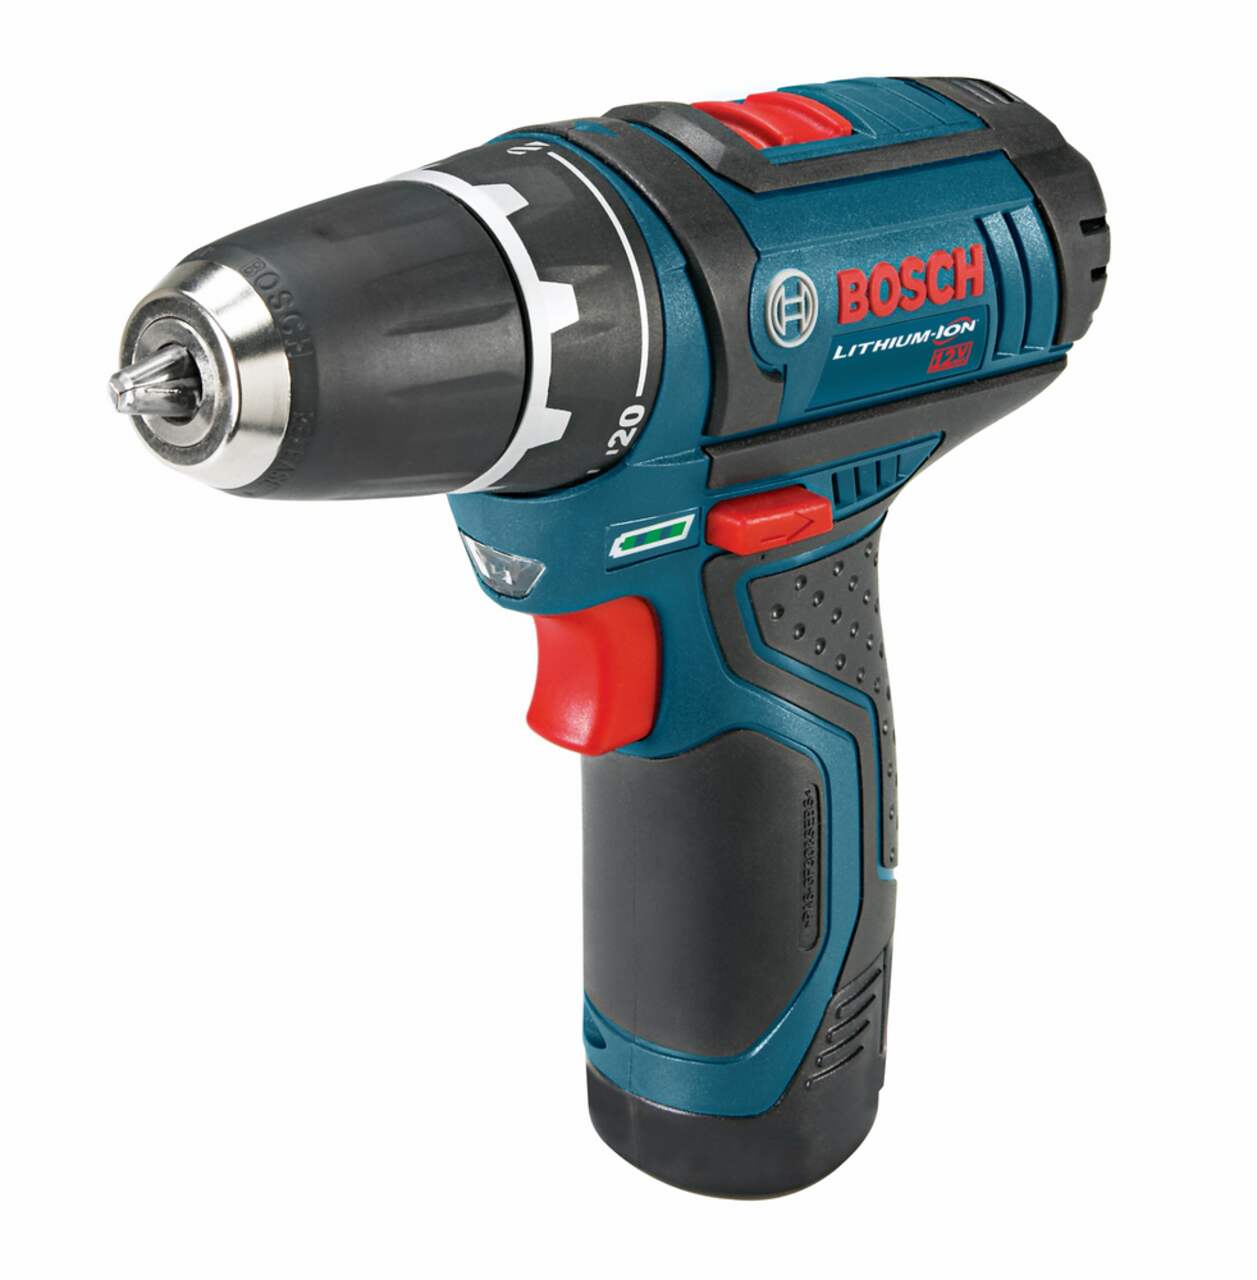 https://media-www.canadiantire.ca/product/fixing/tools/portable-power-tools/0543278/bosch-12v-max-3-8-drill-driver-kit-with-2-2-0ah-batteries-551aad4e-119f-42d4-ba66-91b0f450e02e.png?imdensity=1&imwidth=640&impolicy=mZoom